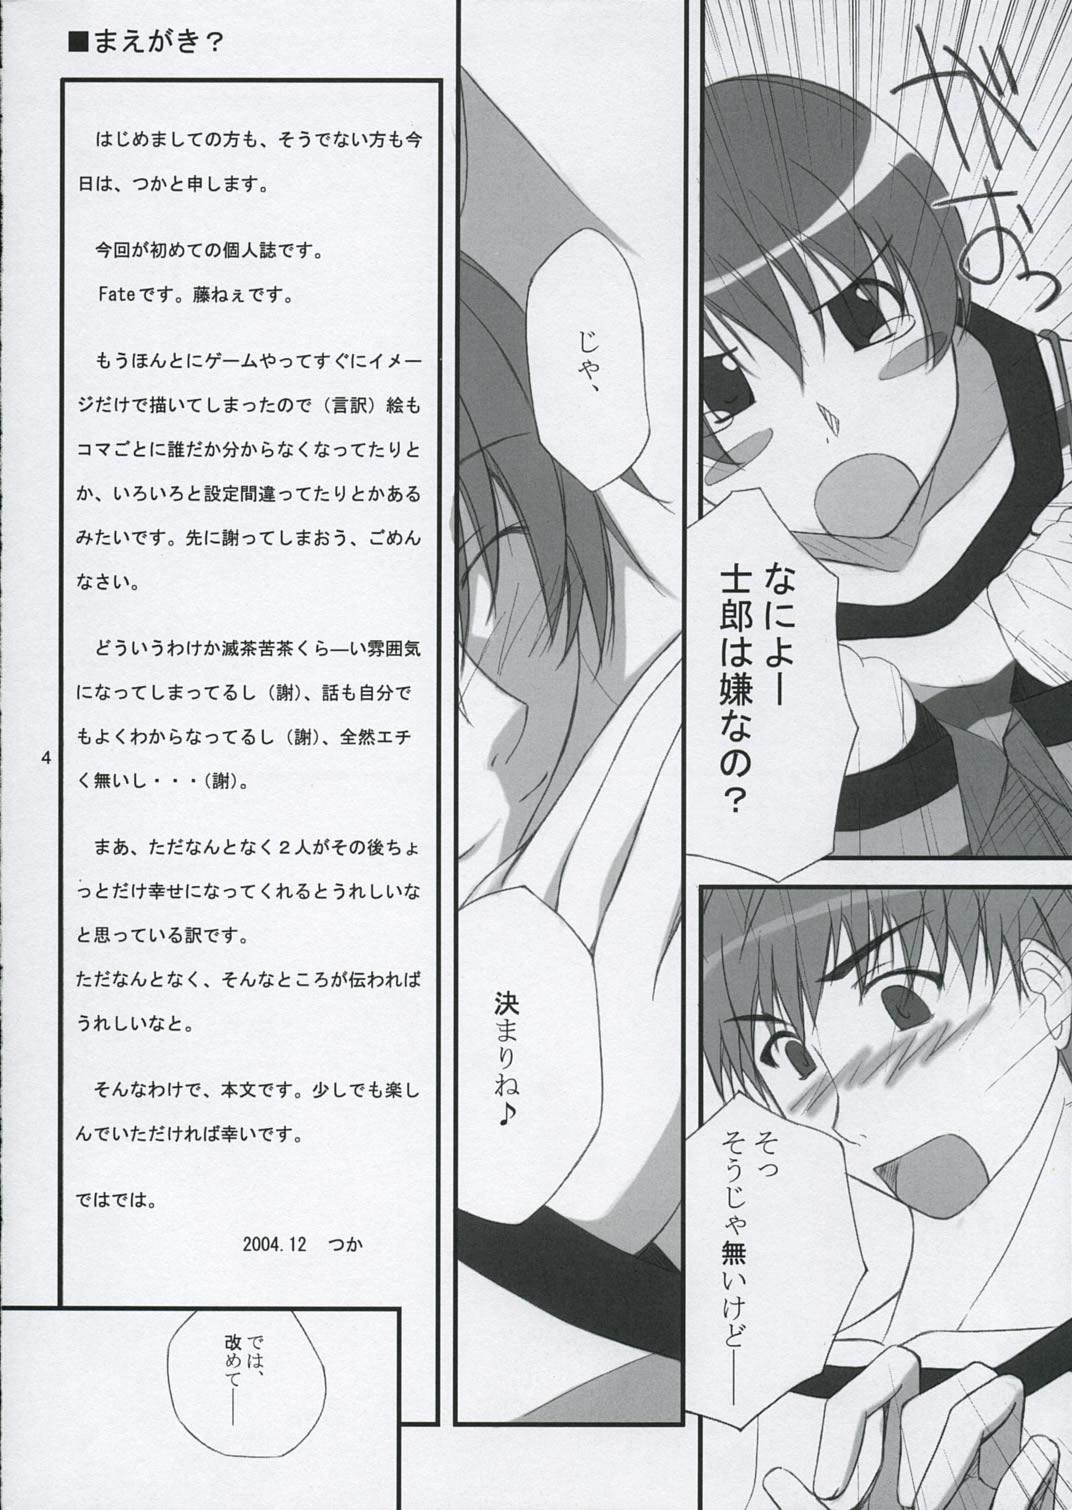 Highschool The Place To Be? - Fate stay night Sexcam - Page 3